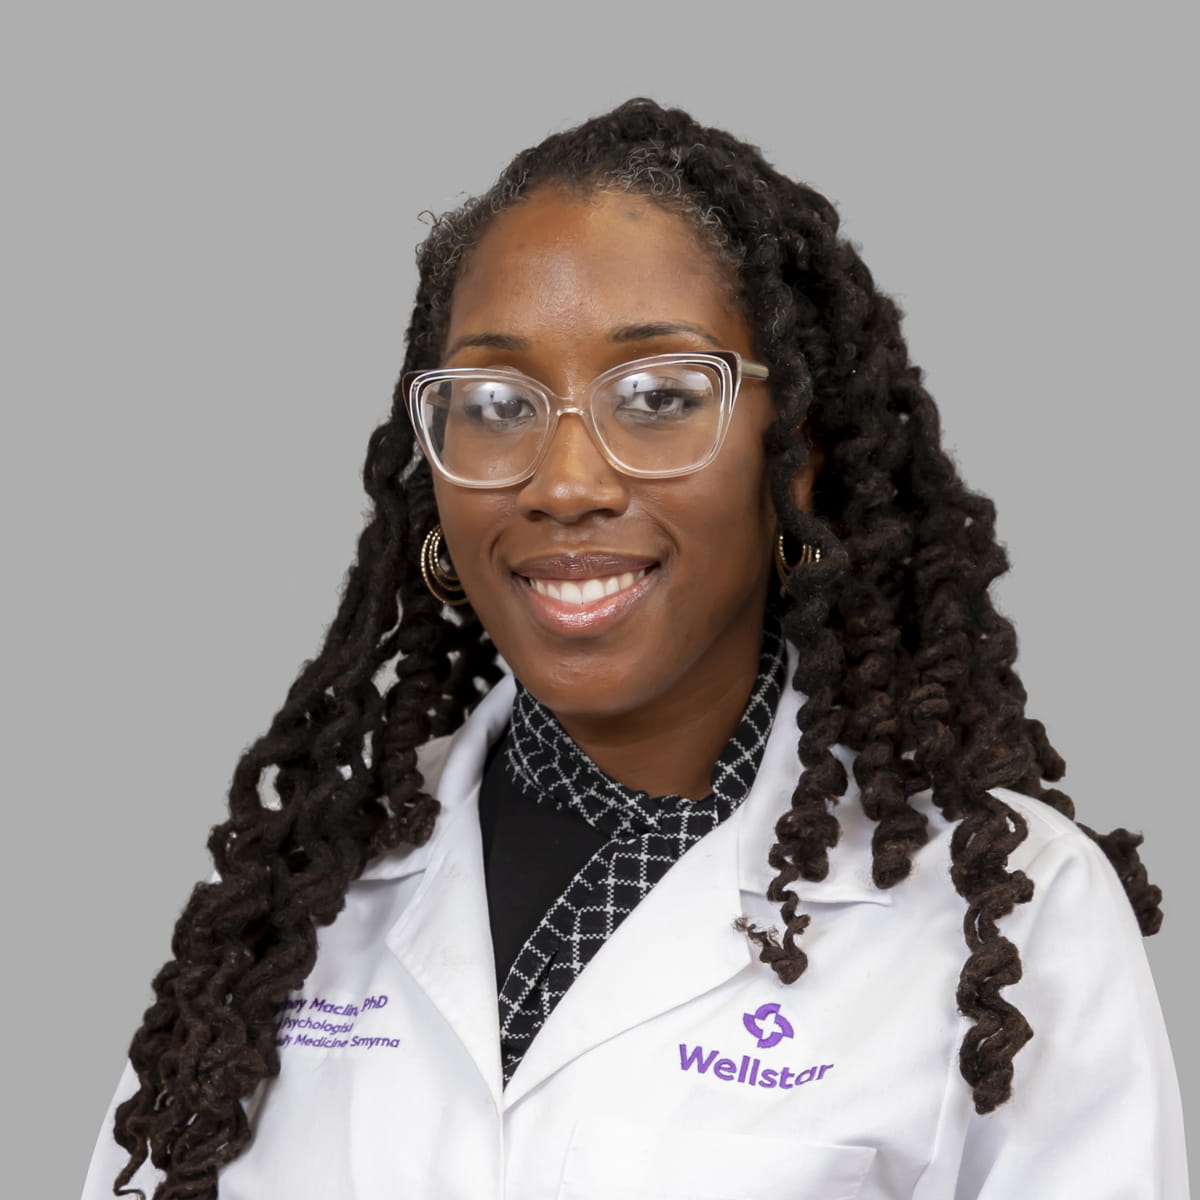 A friendly image of Courtney Maclin MD